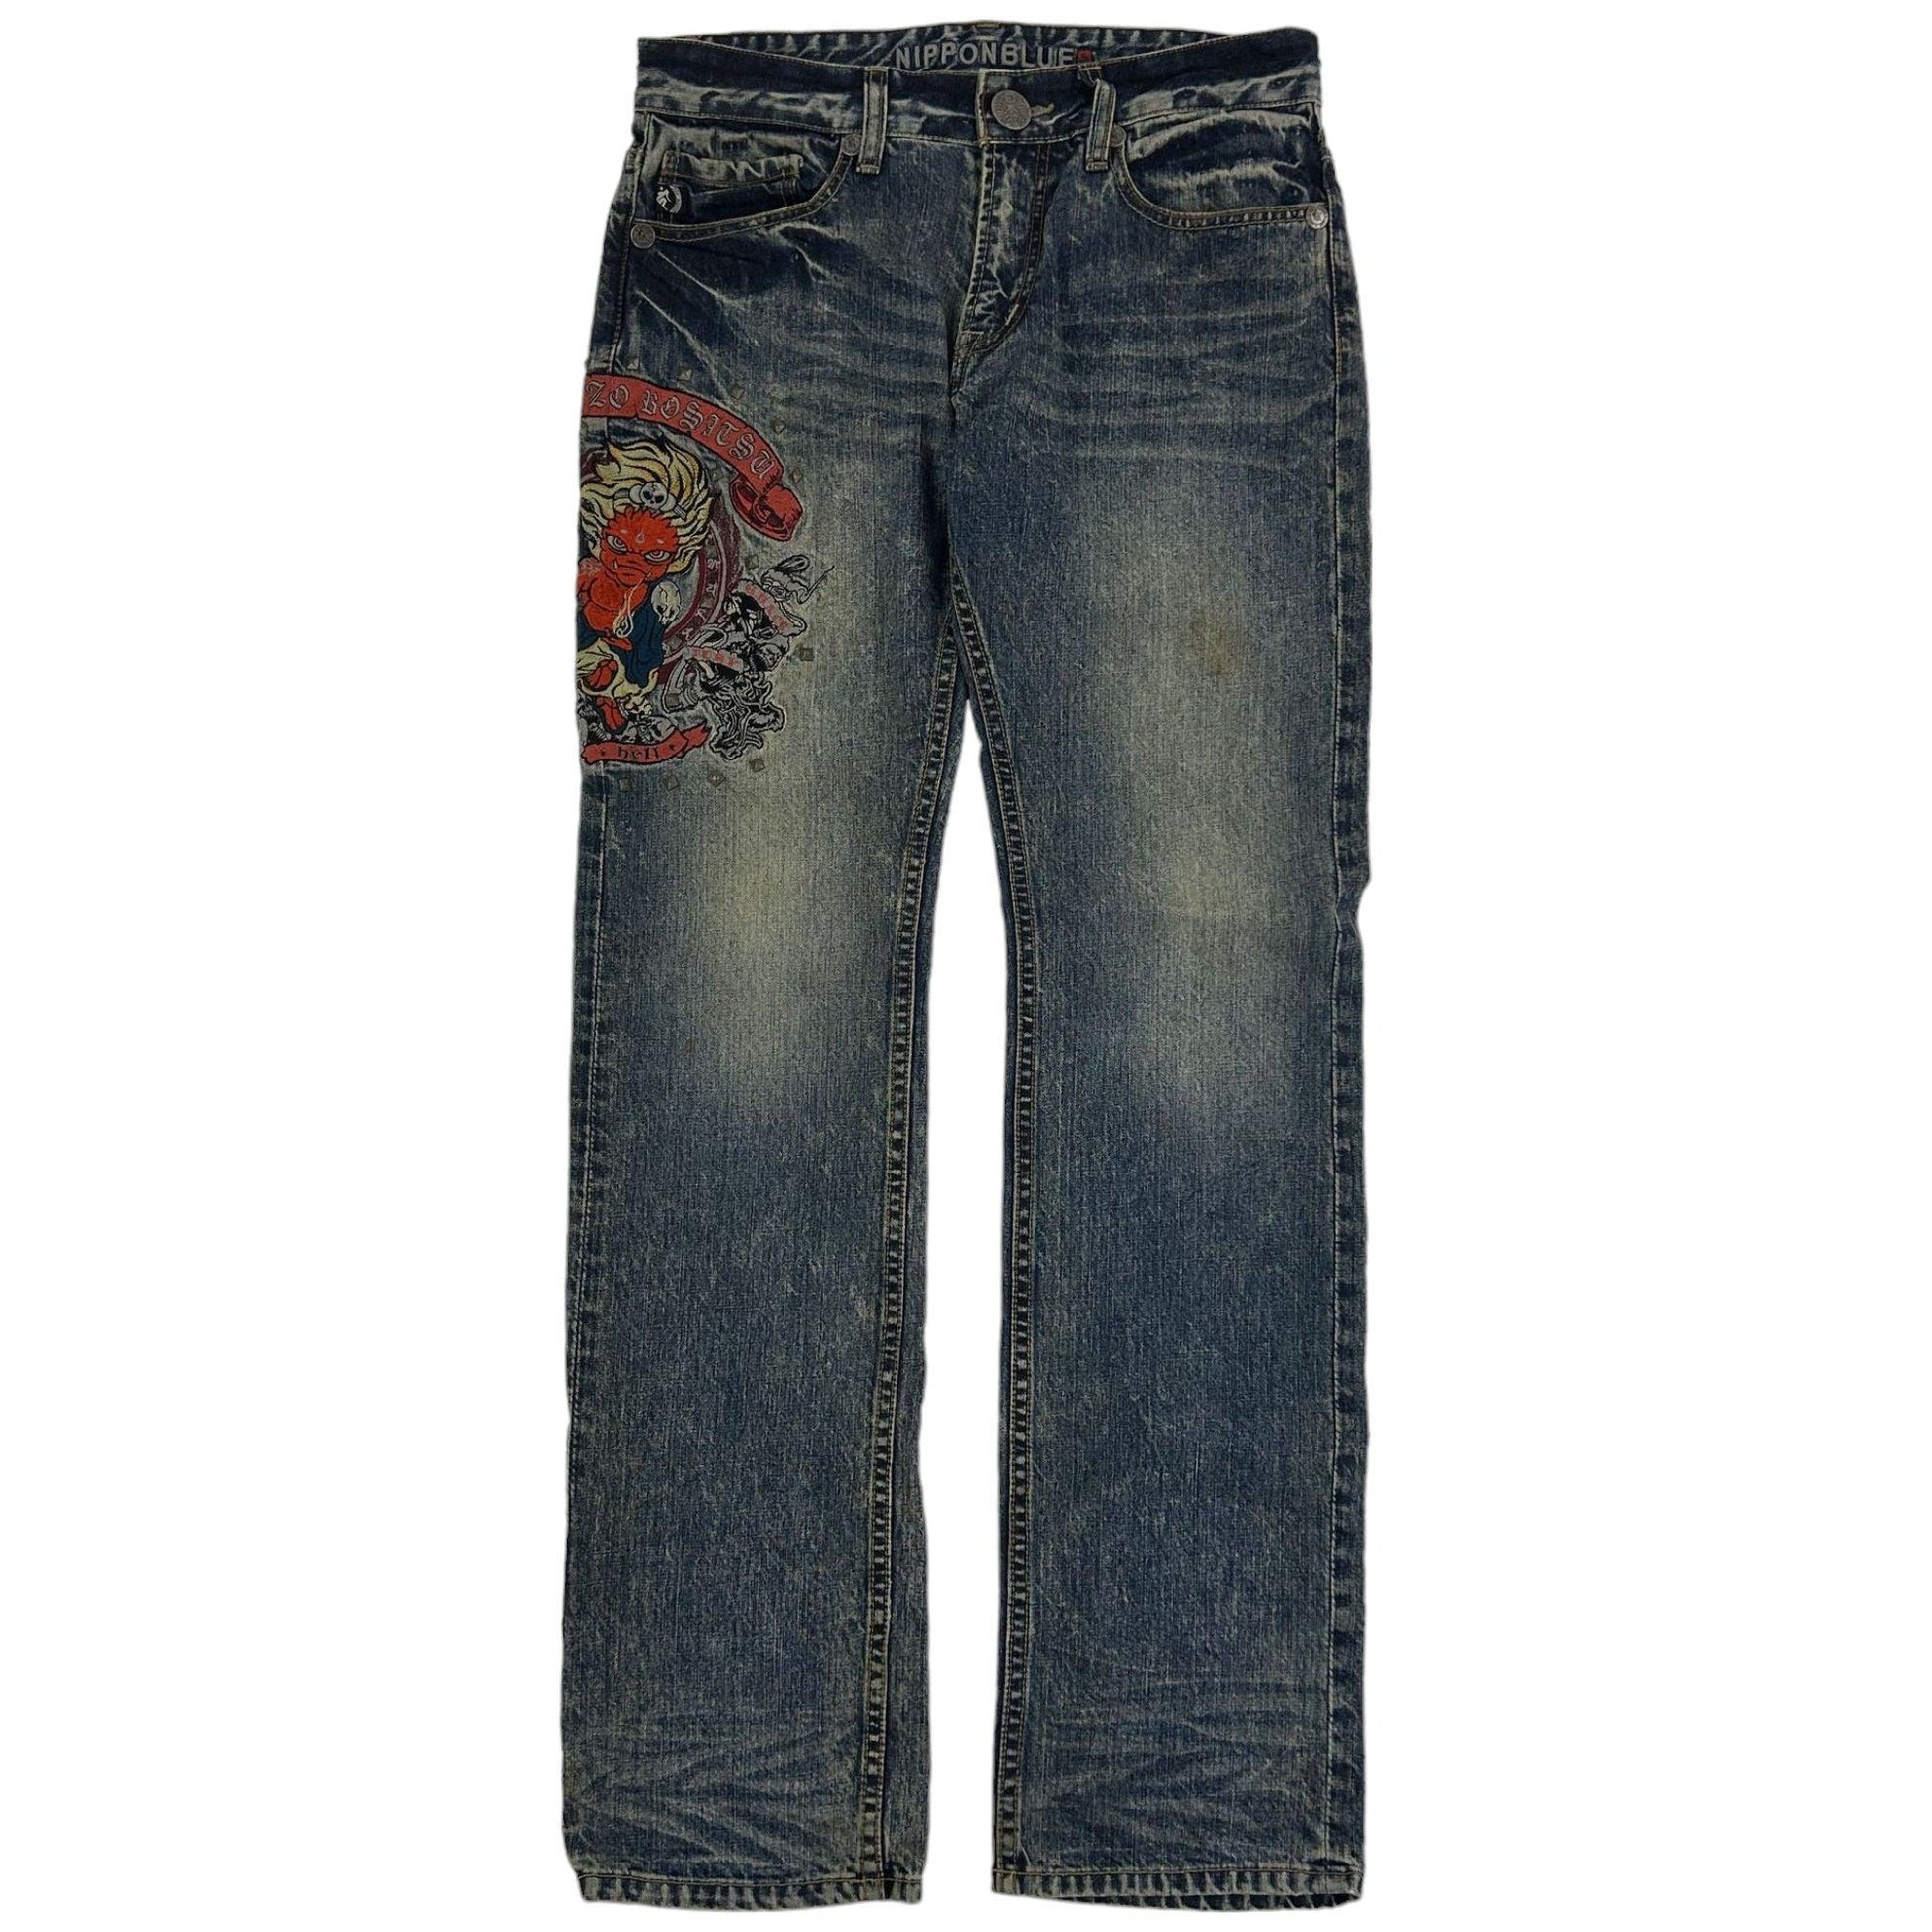 Vintage Monster Embroidered Japanese Denim Jeans Size W30 - Known Source